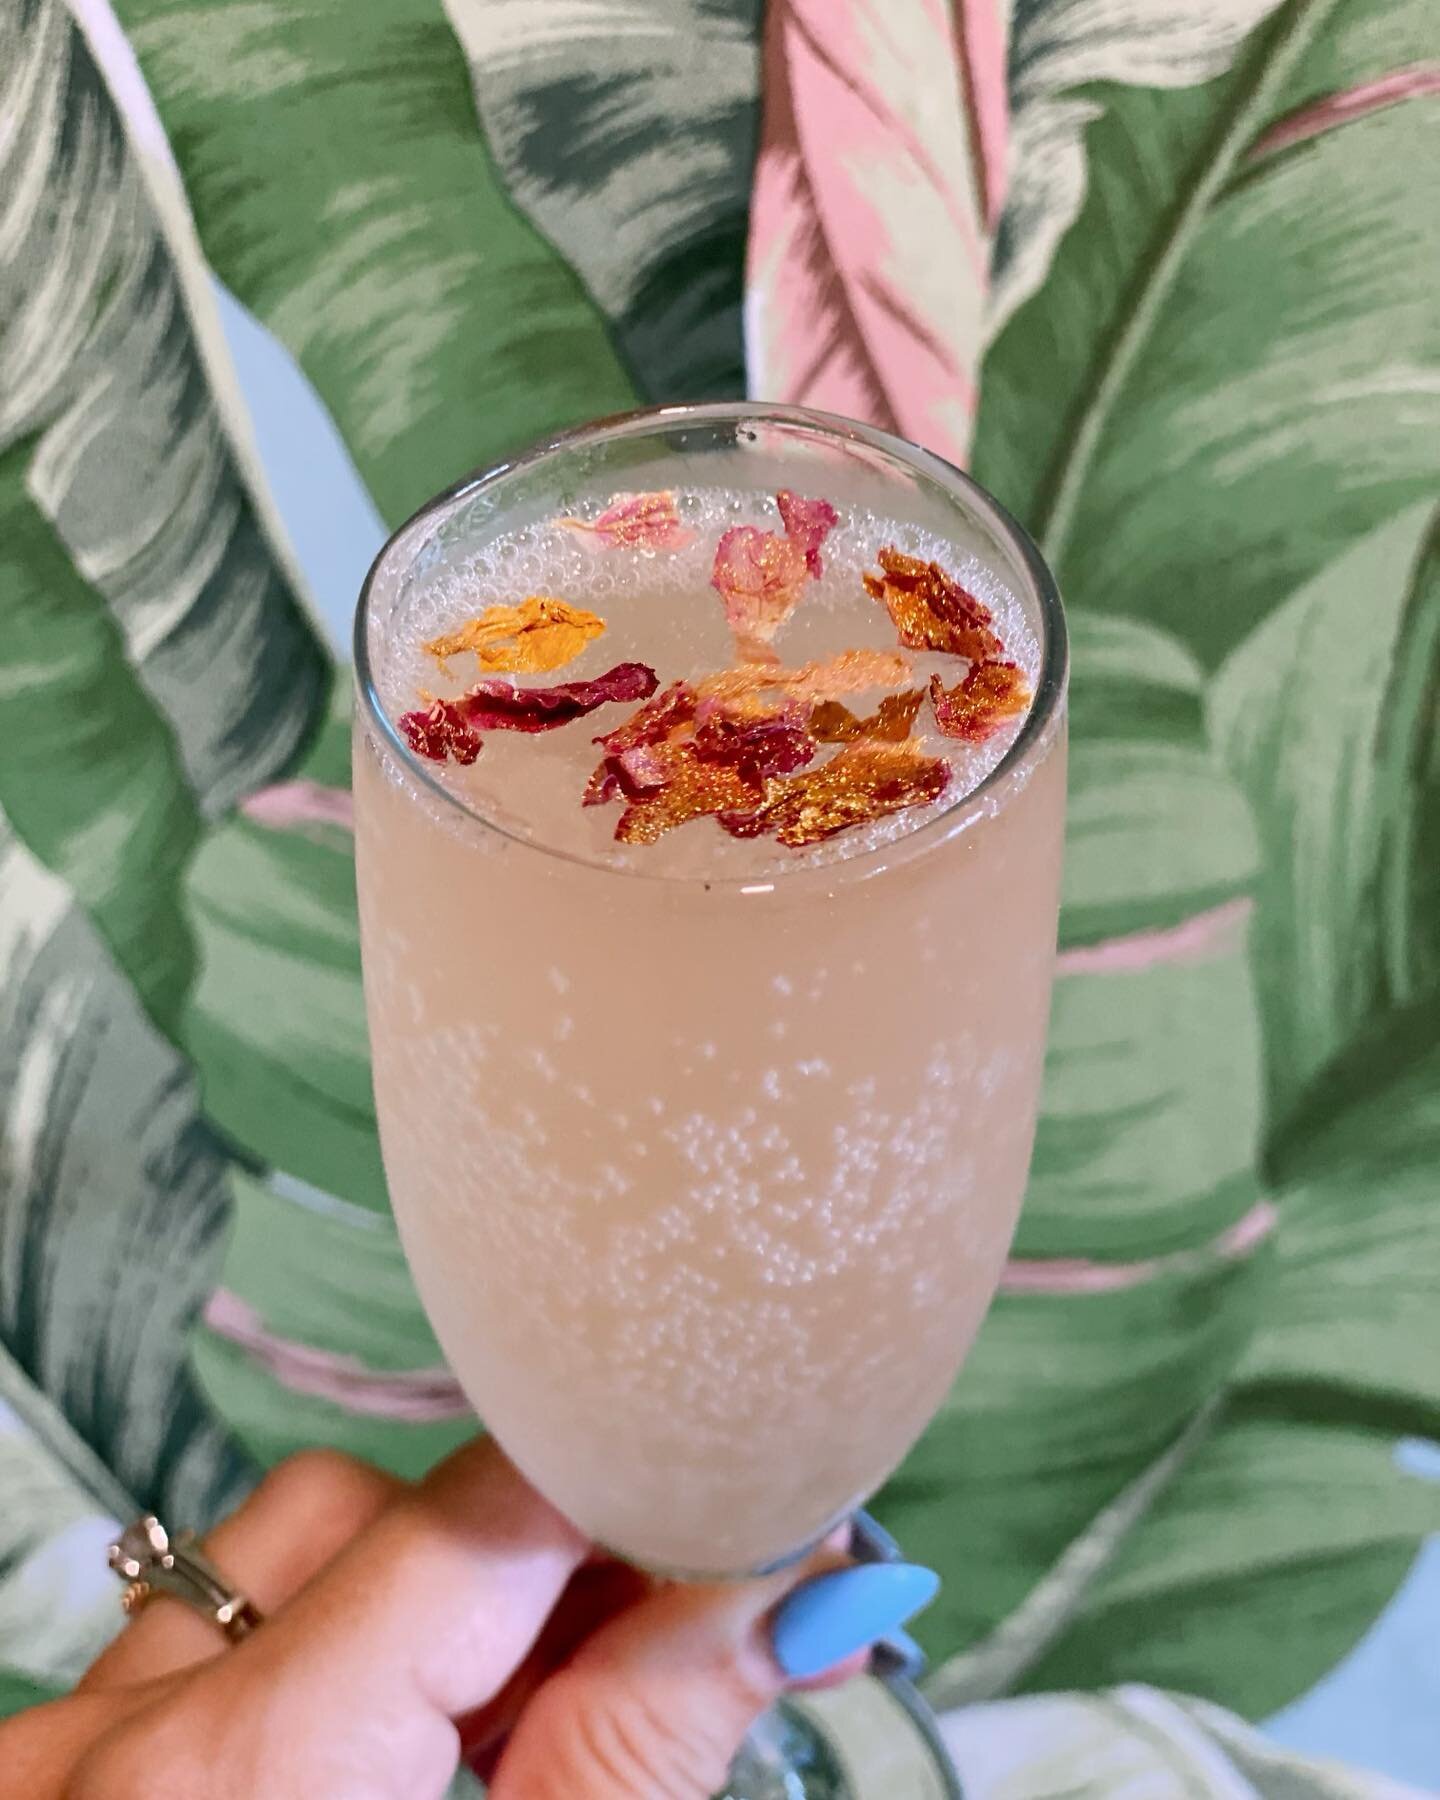 Mimosa of the day -The Flower: Grapefruit juice, rose liqueur, Prosecco, gold dusted rose petals! Come join us today and everyday 7am-2pm #stcroix #christiansted #brunch #mimosas #breakfast